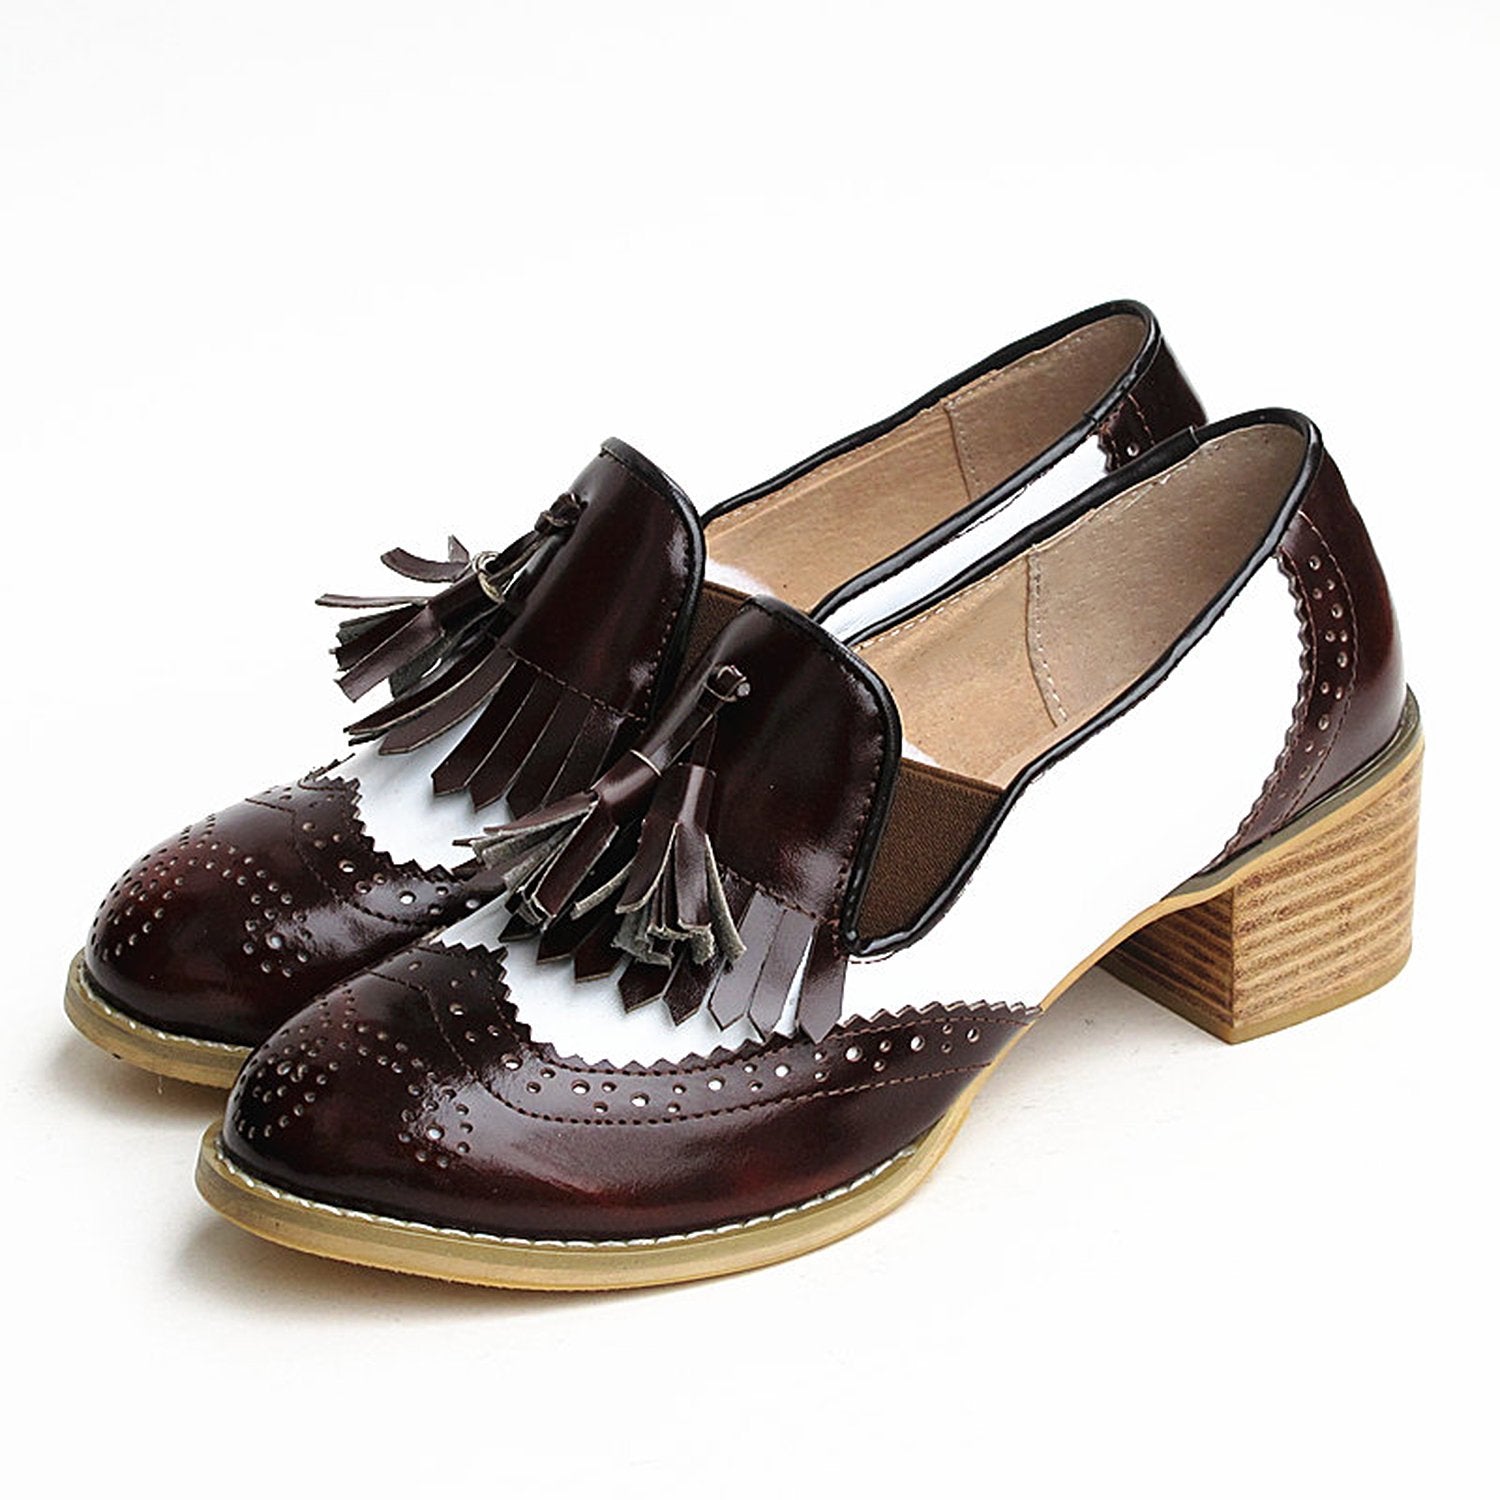 Classic-Tassels-Brogue-Wingtip-Oxfords-Loafer-Shoes